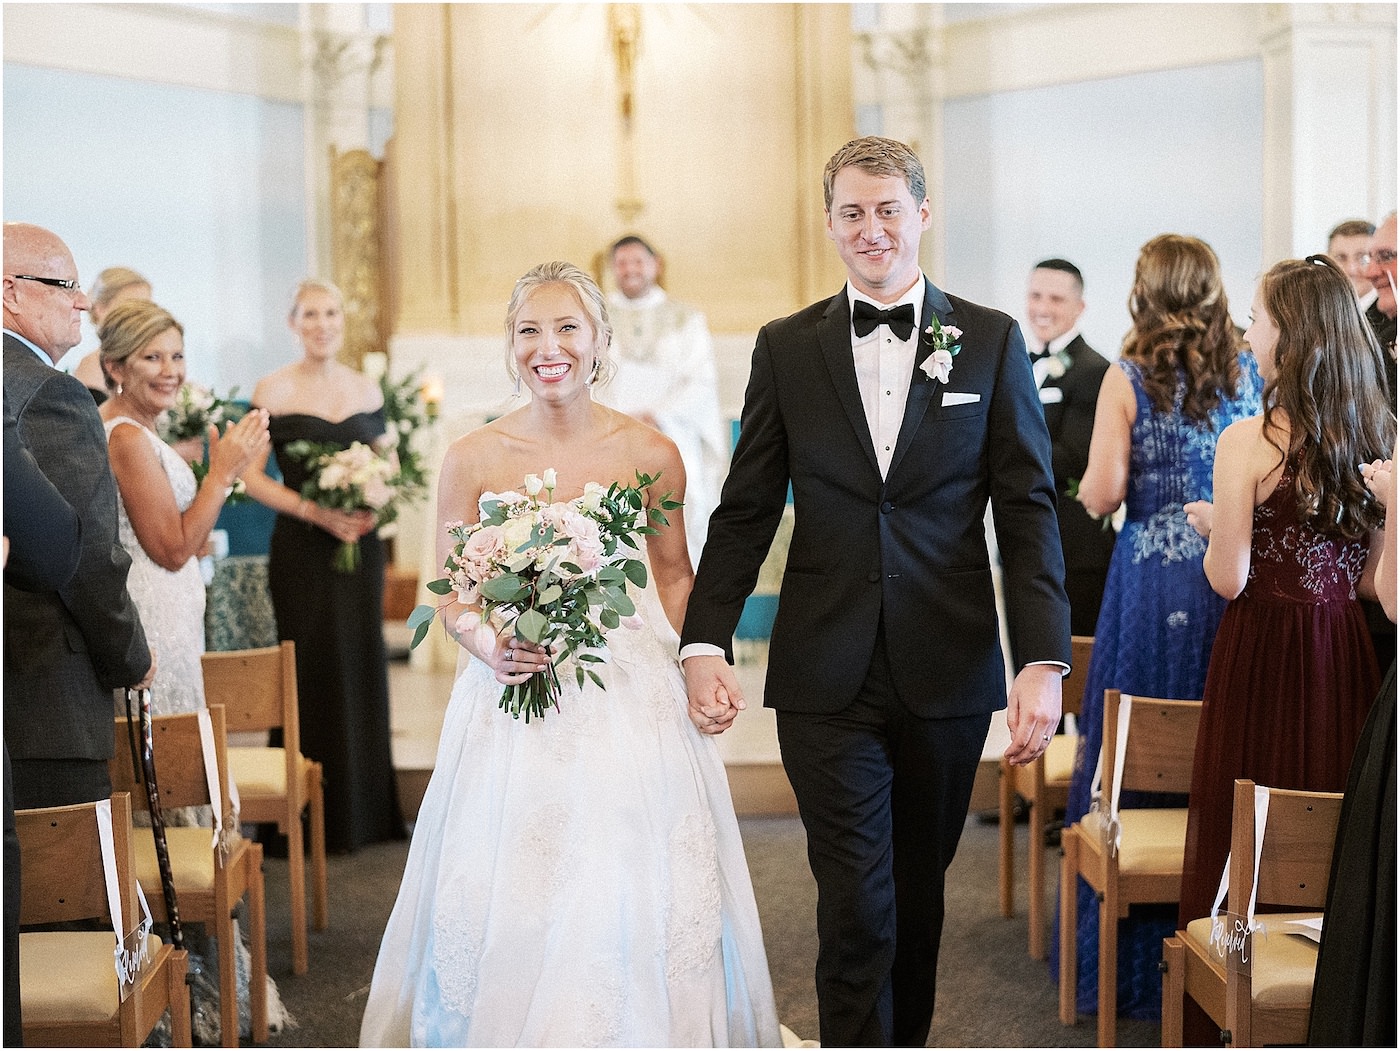 Bride and Groom Ceremony Aisle Exit | Traditional Tampa Wedding Ceremony at Academy of Holy Names Chapel